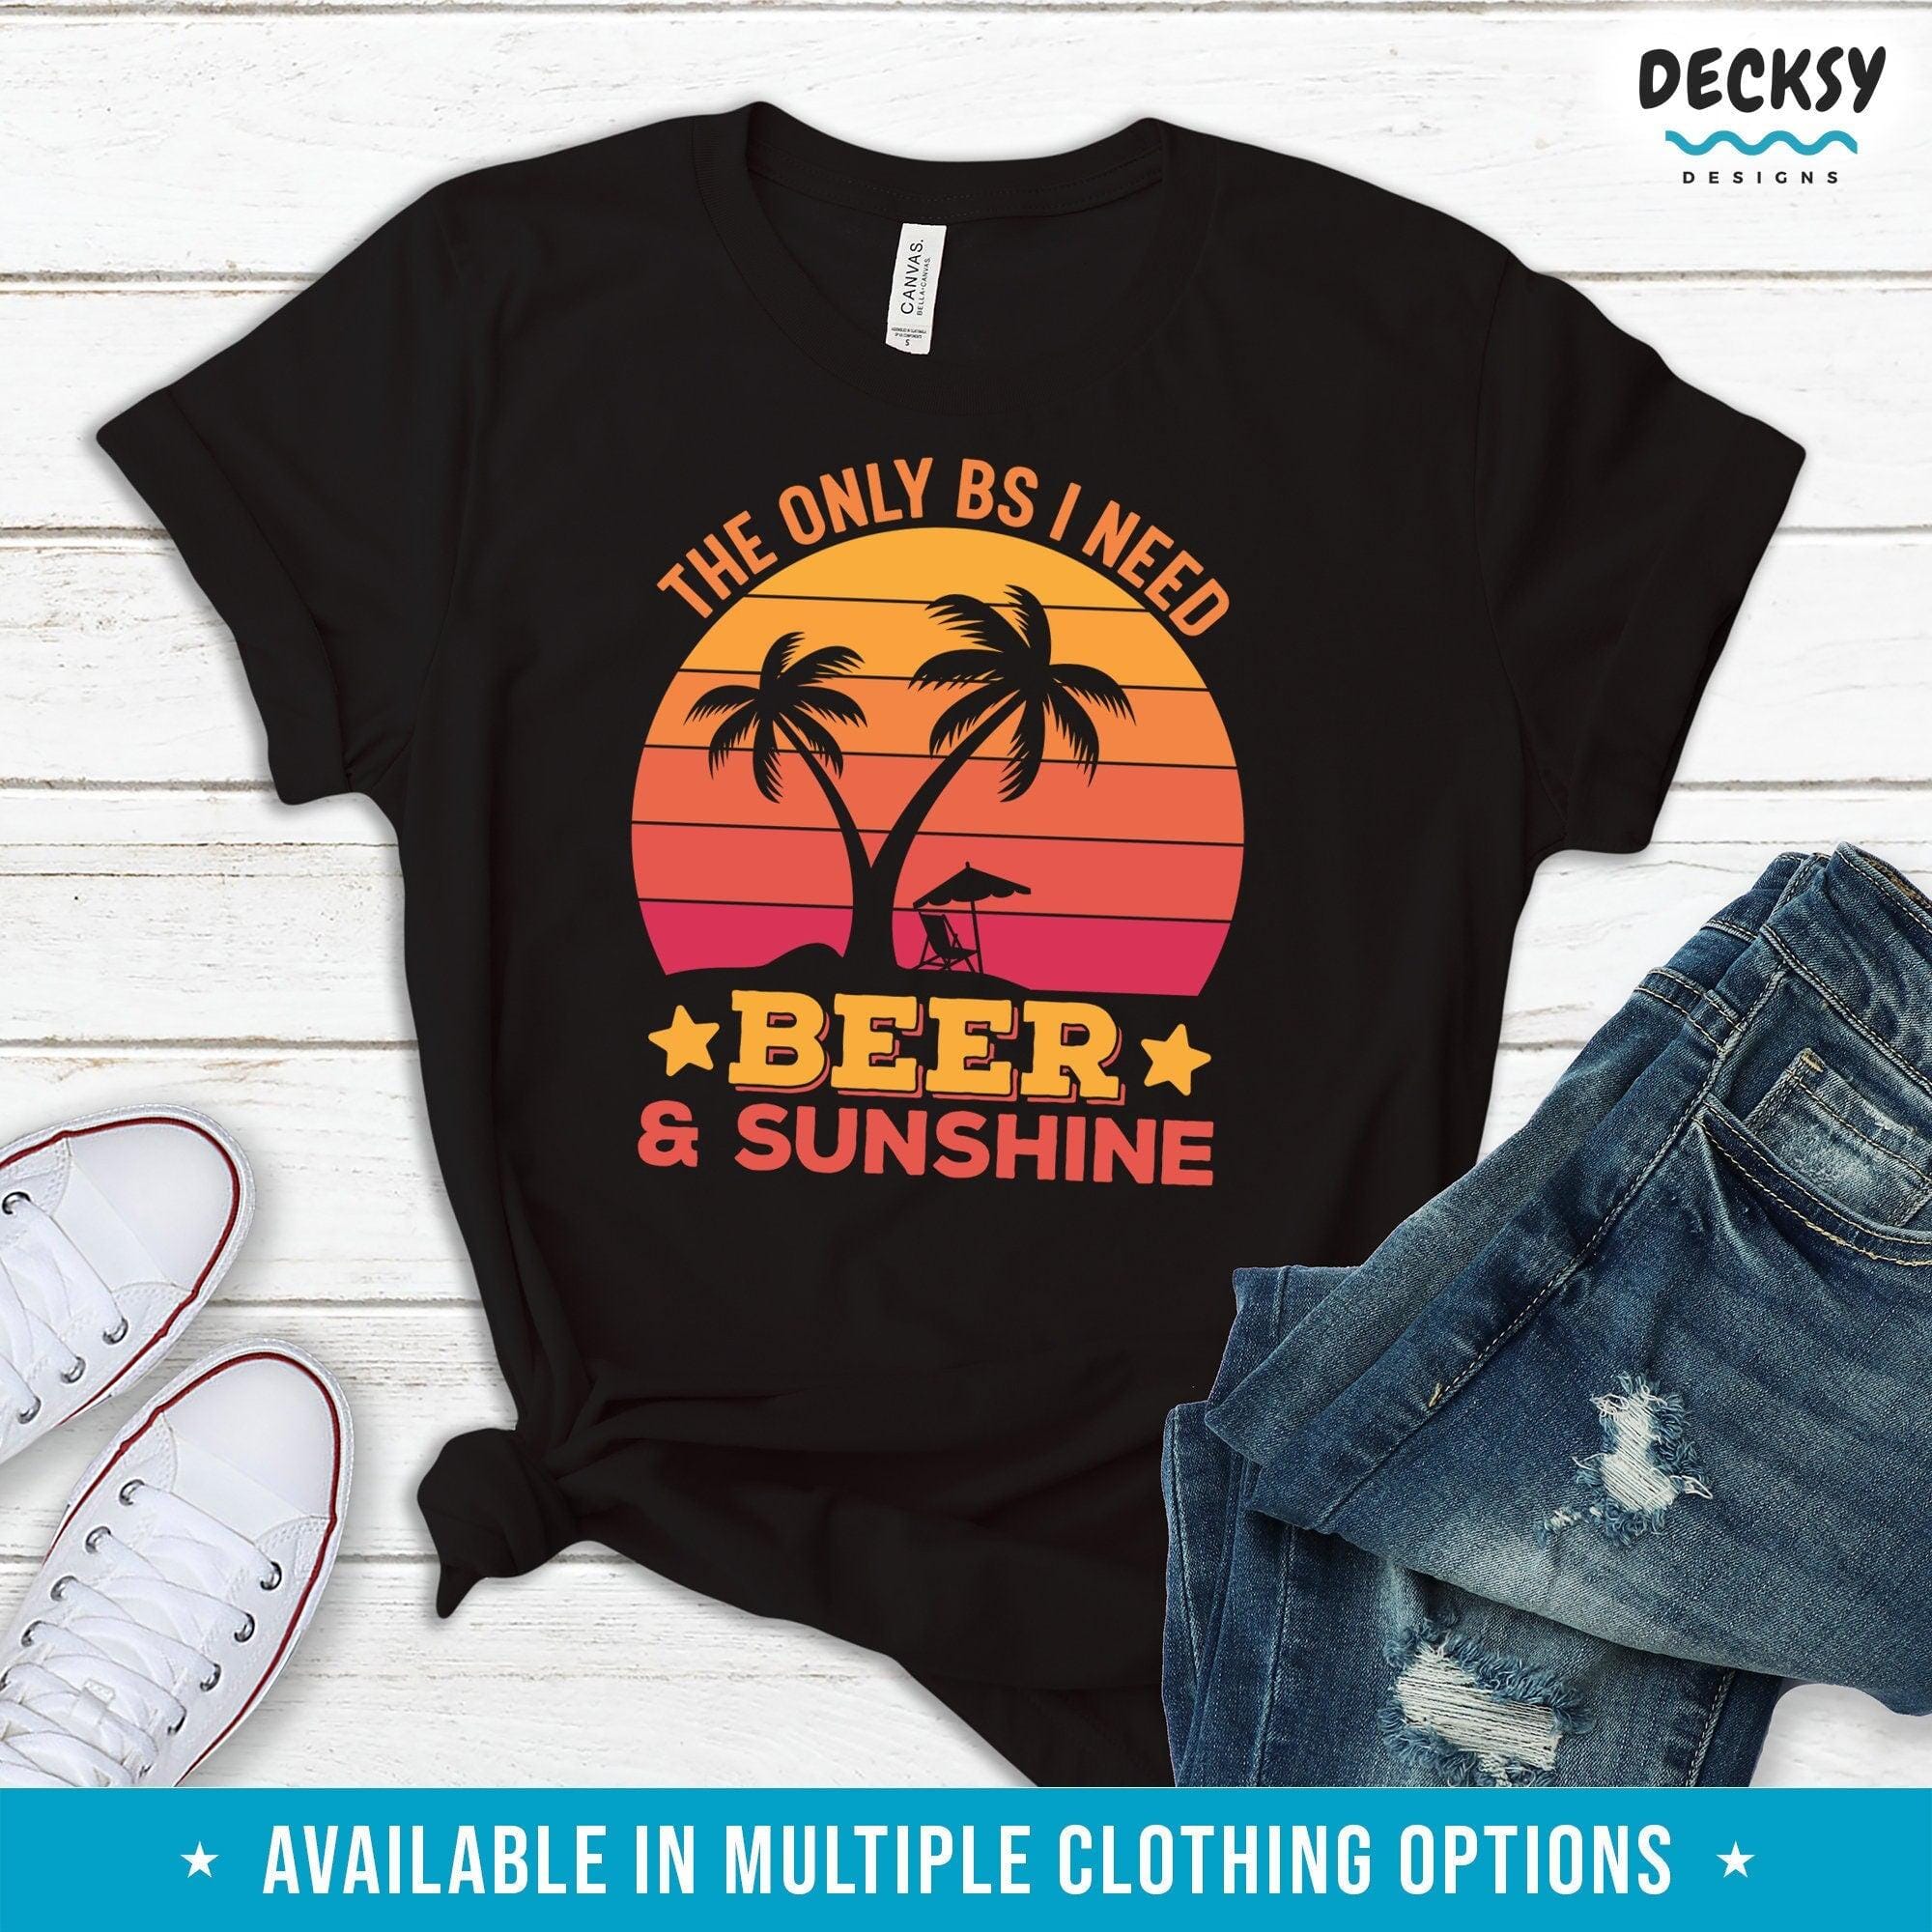 Beer & Sunshine Shirt, Funny Beer Lover Gift-Clothing:Gender-Neutral Adult Clothing:Tops & Tees:T-shirts:Graphic Tees-DecksyDesigns